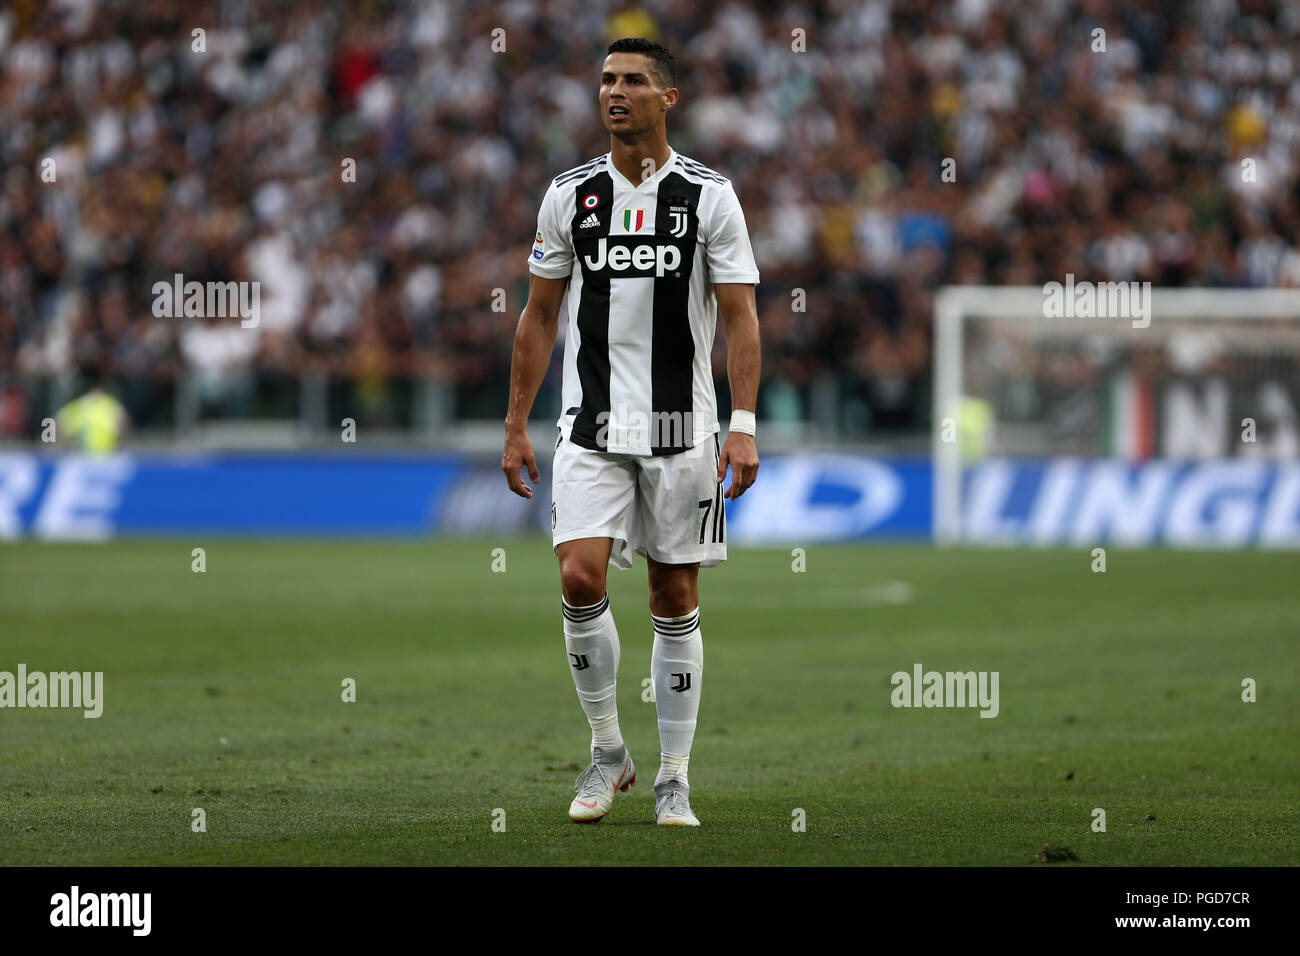 Torino, Italy. 25th August, 2018. Cristiano Ronaldo of Juventus FC  during the Serie A football match between Juventus Fc and SS Lazio.  Credit: Marco Canoniero / Alamy Live News Credit: Marco Canoniero/Alamy Live News Stock Photo